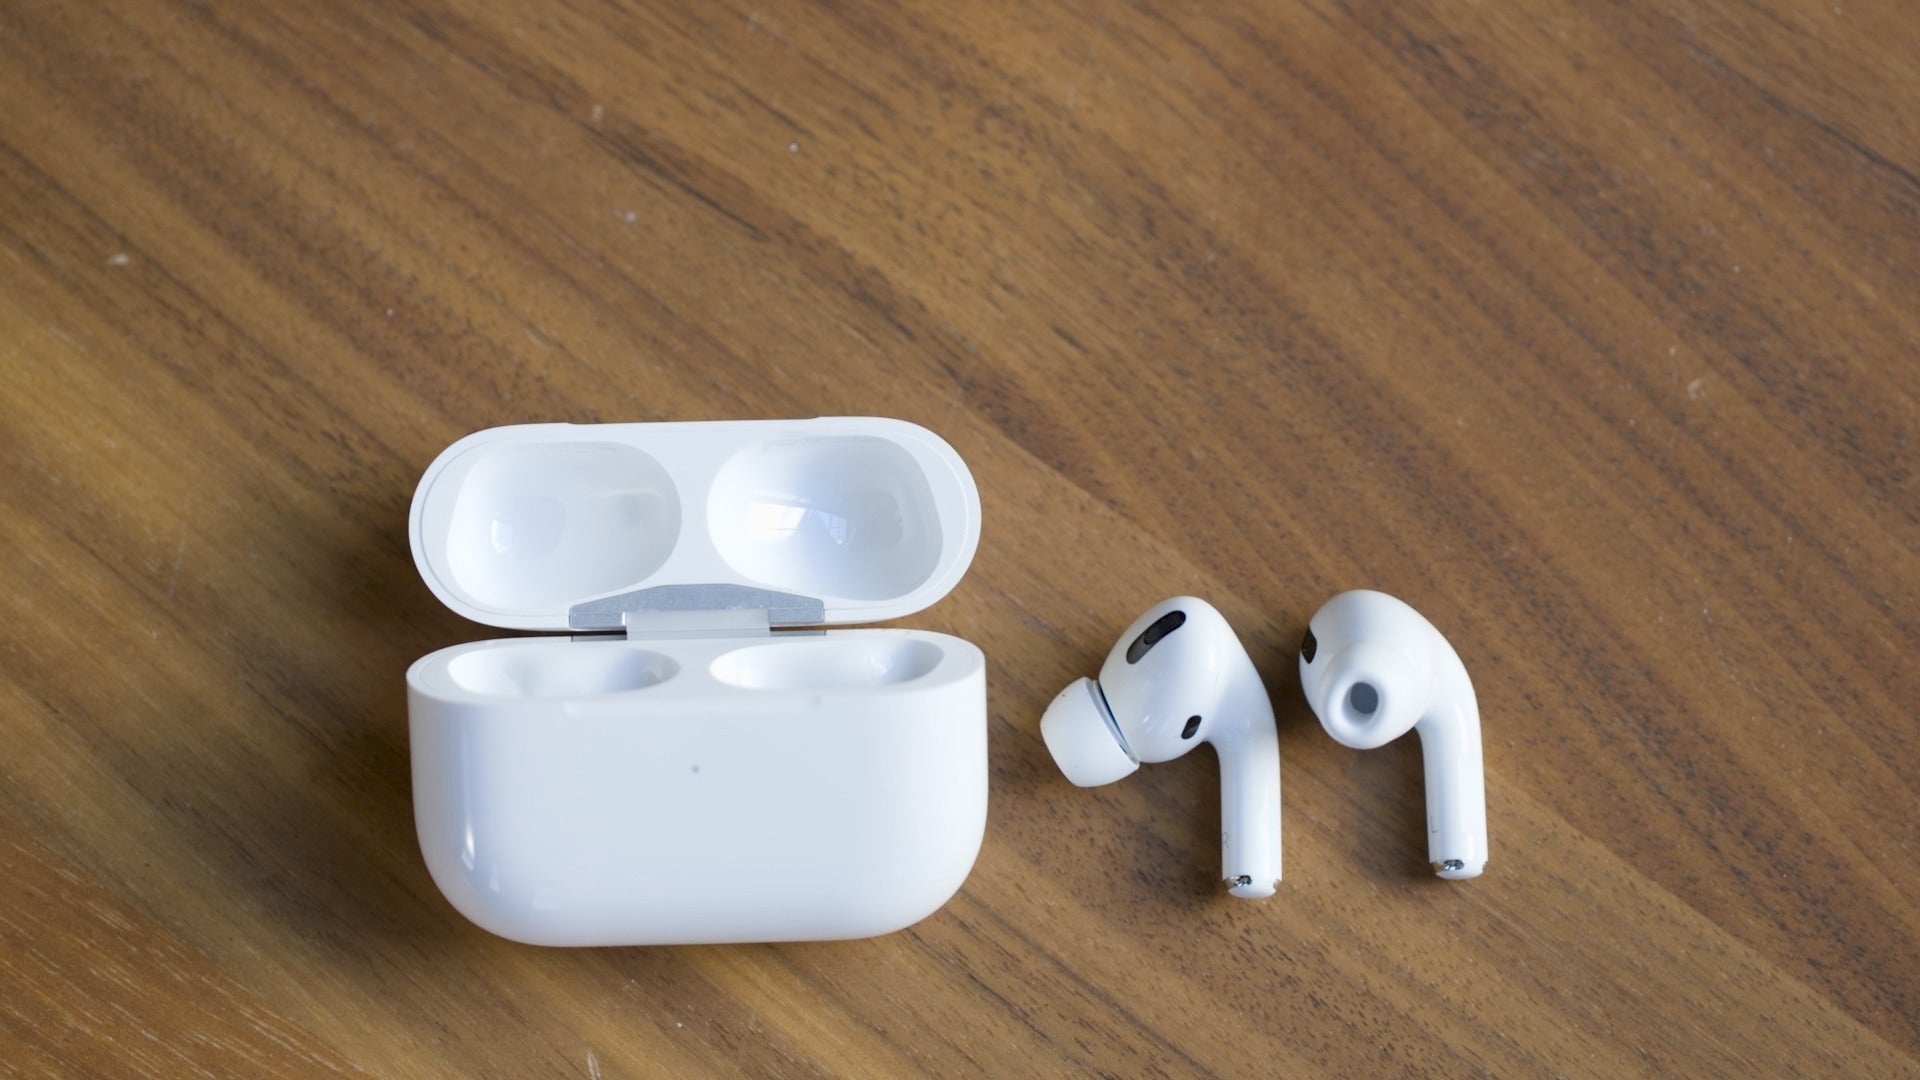 Airpods Pro review